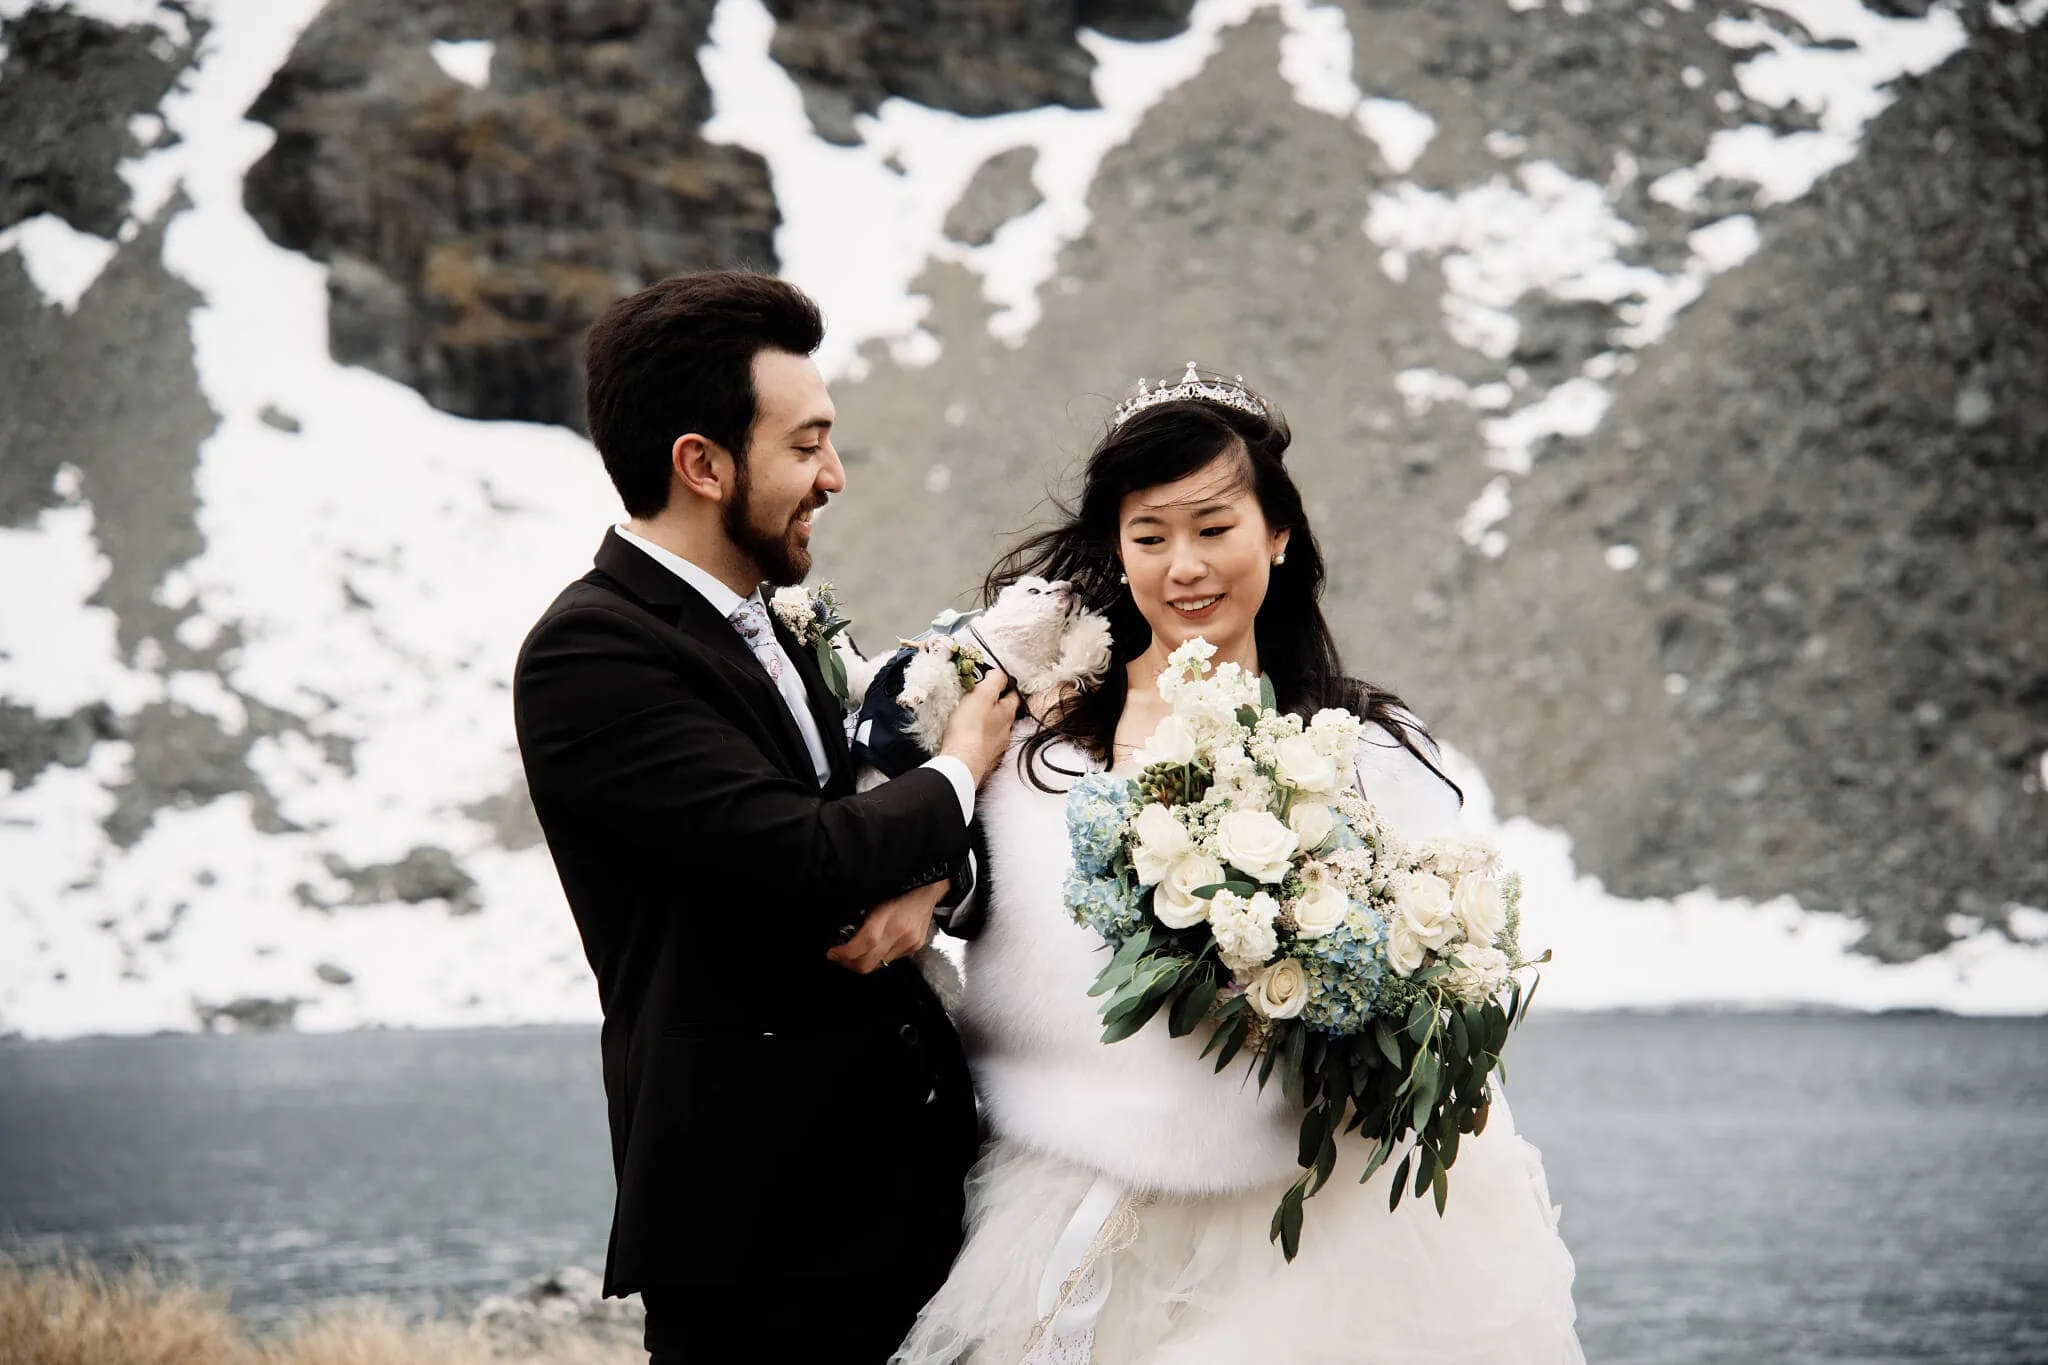 Carlos and Wanzhu's intimate heli elopement wedding with mountains in the background.